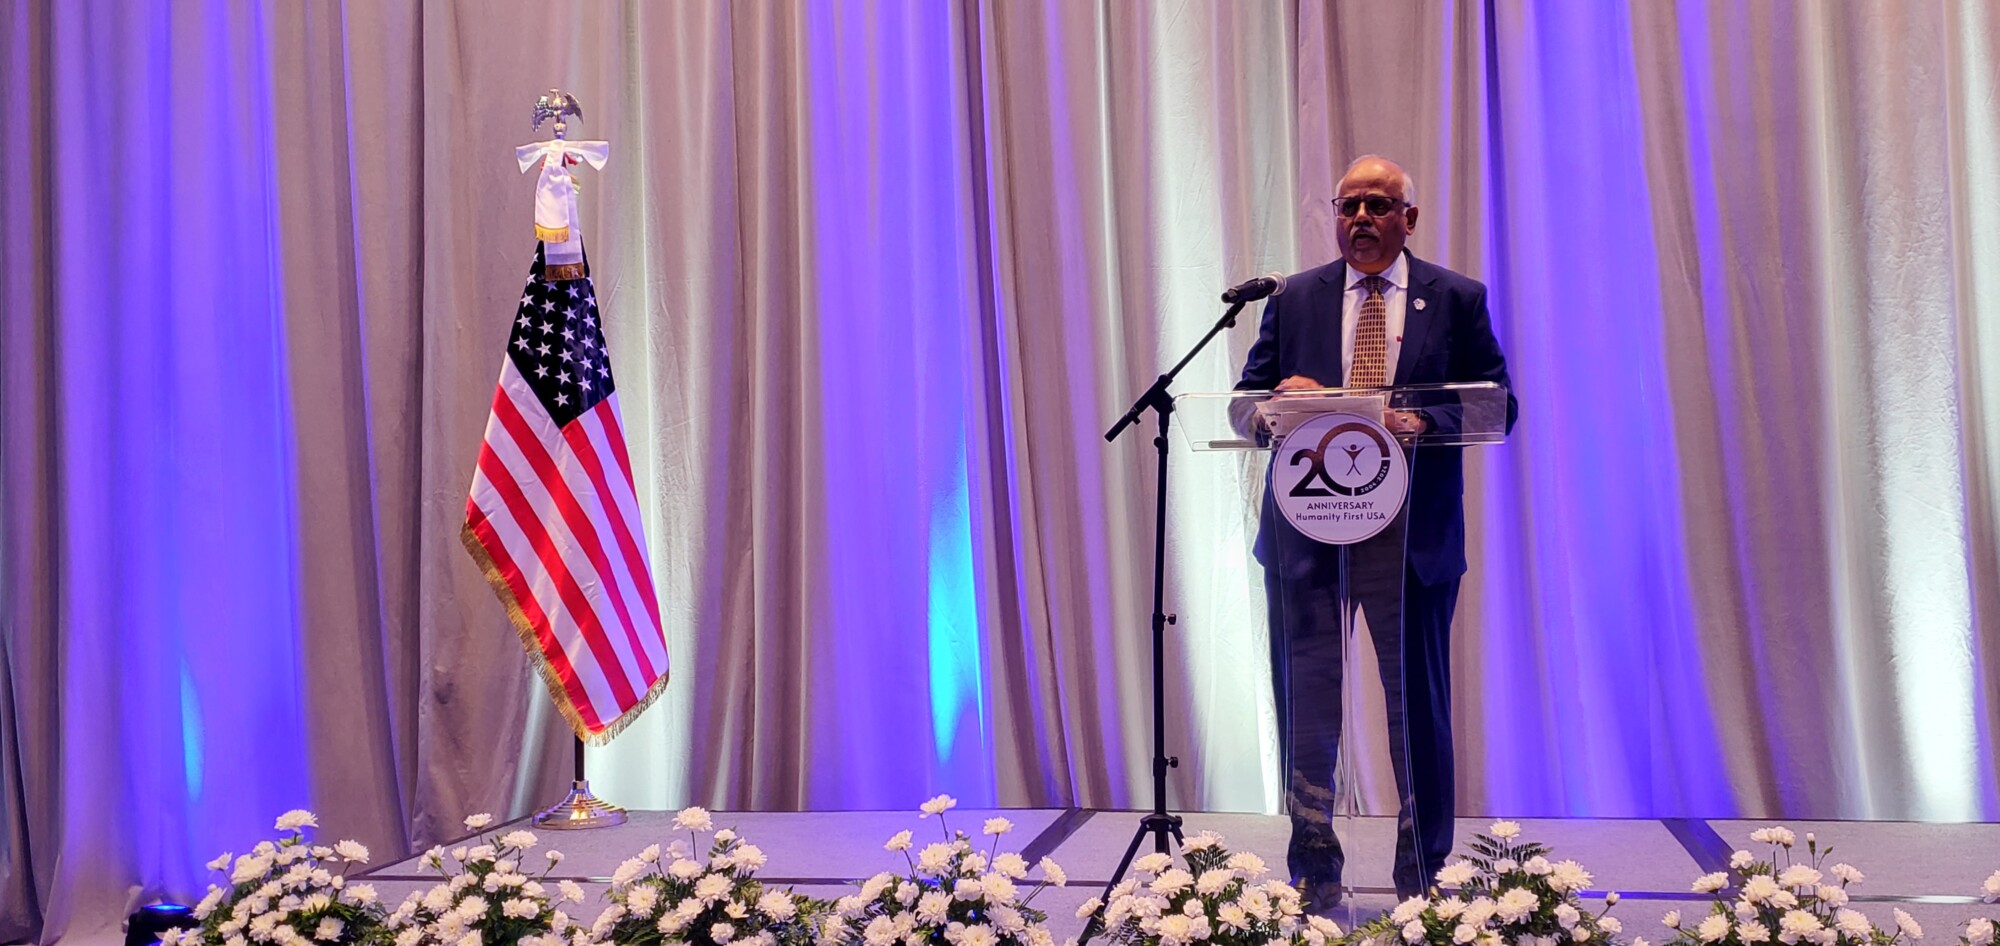 A man dressed in suit and tie stands at the podium of a stage with white curtains behind it, white flowers in pots at the front edge, and an American flag on a stand to the viewer's left.